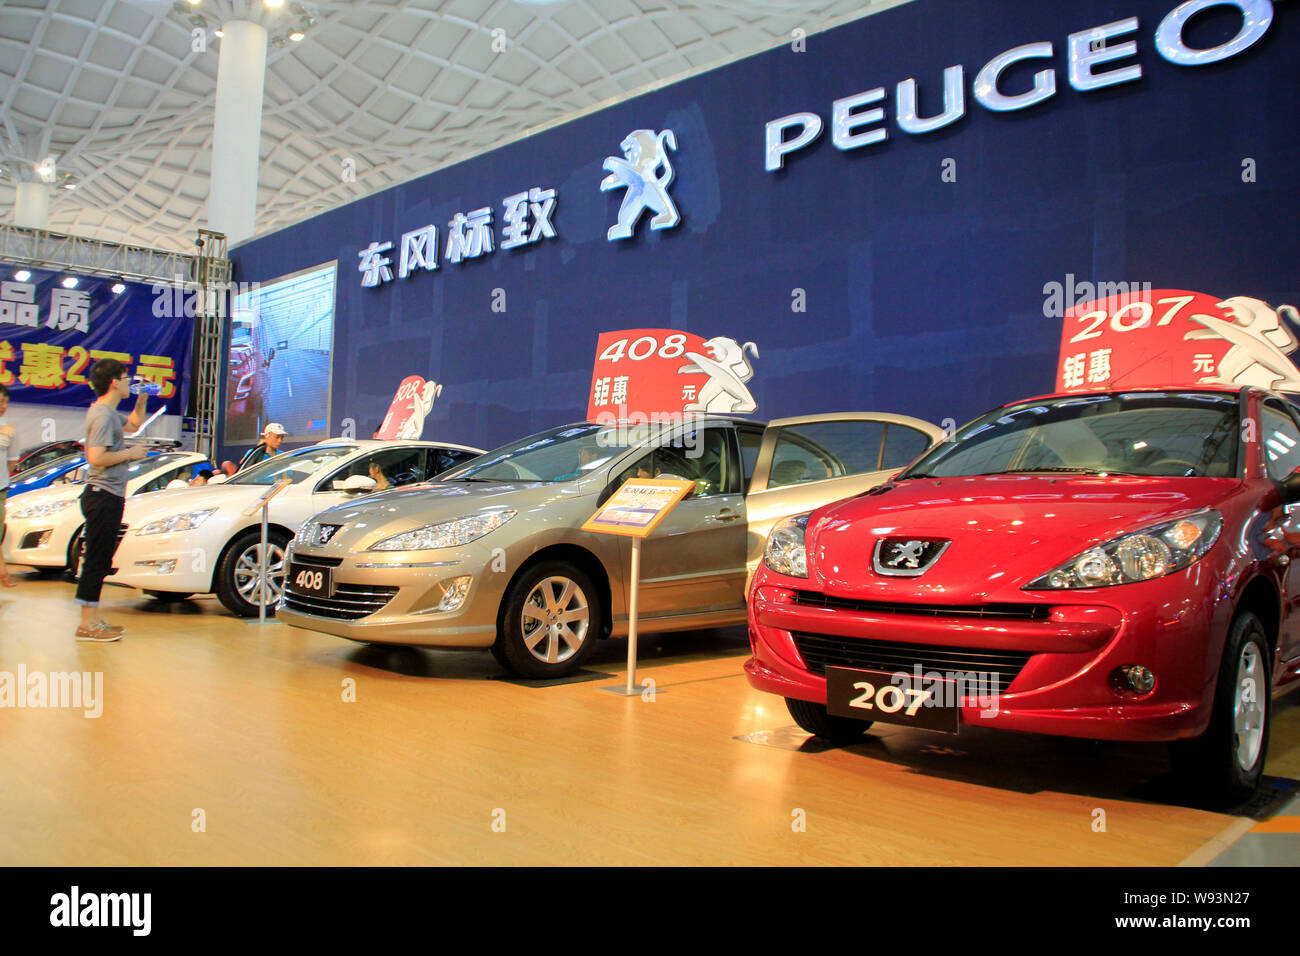 --FILE--Cars are displayed at the stand of Peugeot during the 6th Hainan automobile expo in Haikou city, south Chinas Hainan province, 8 September 201 Stock Photo